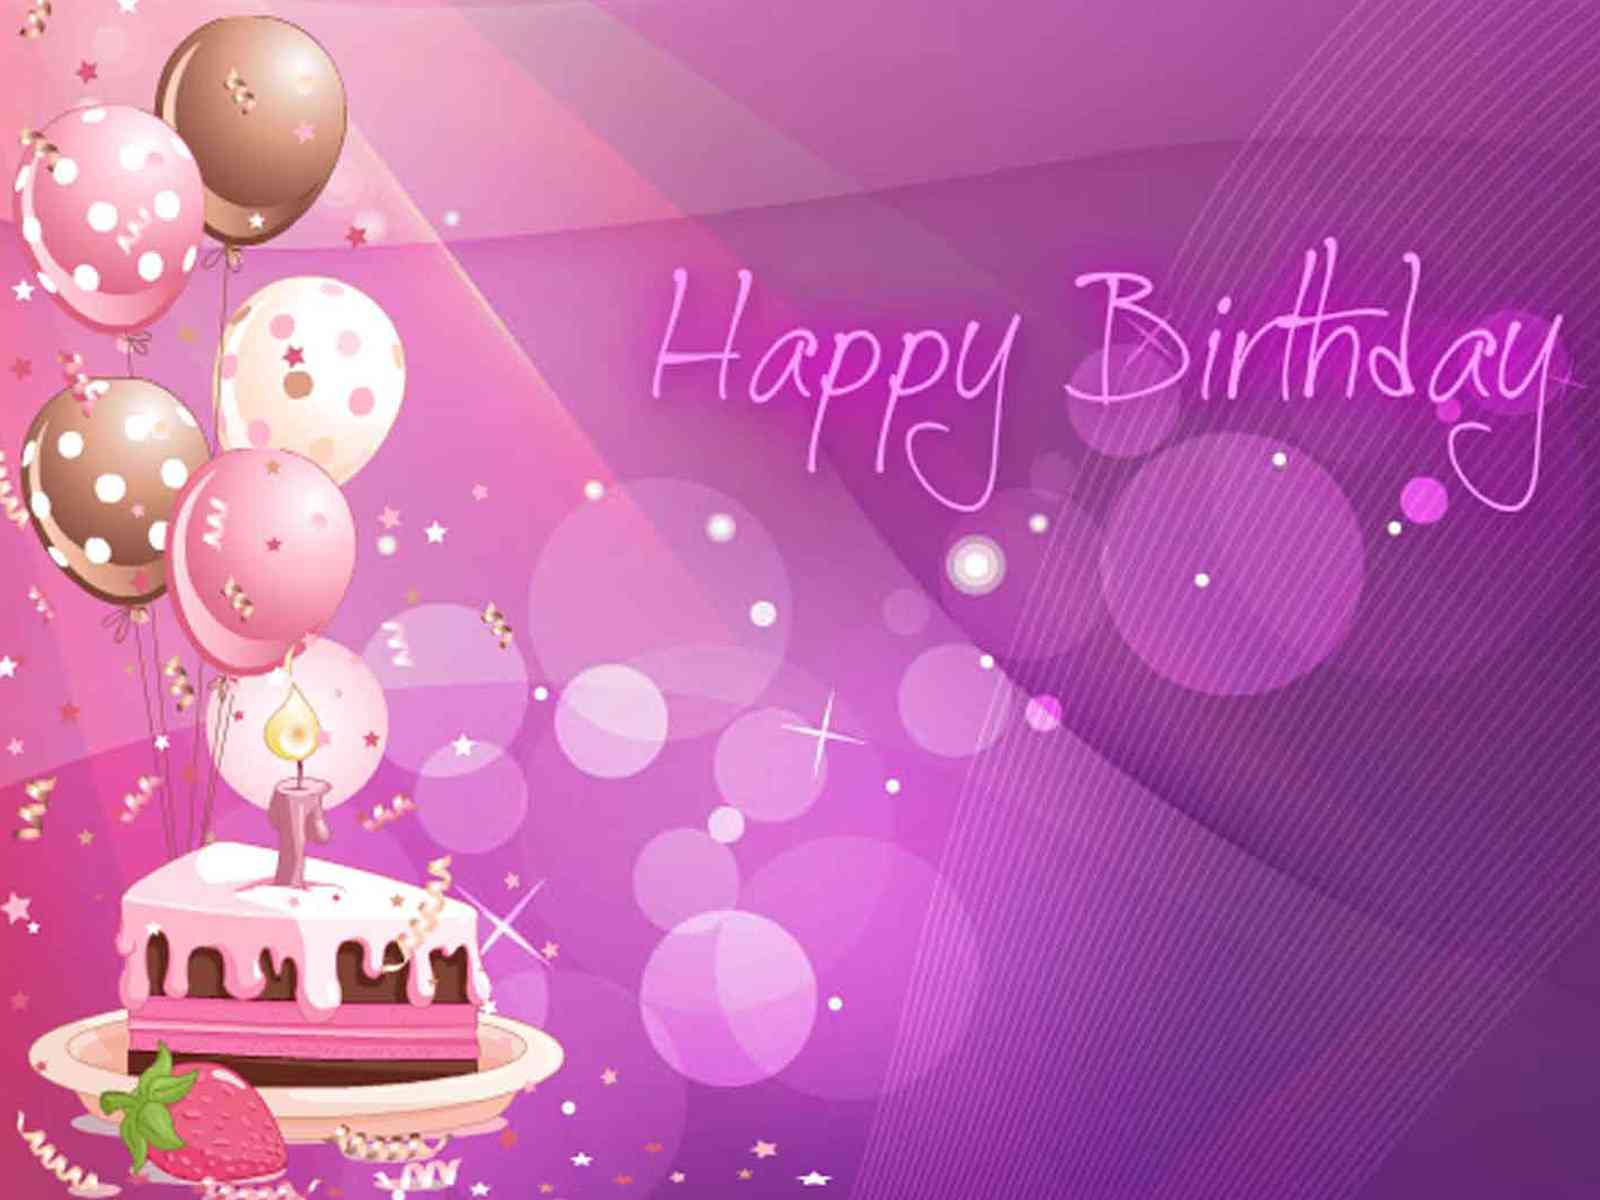 Free Happy birthday wishes 2015 hd wallpapers and Birthday backgrounds 1600x1200